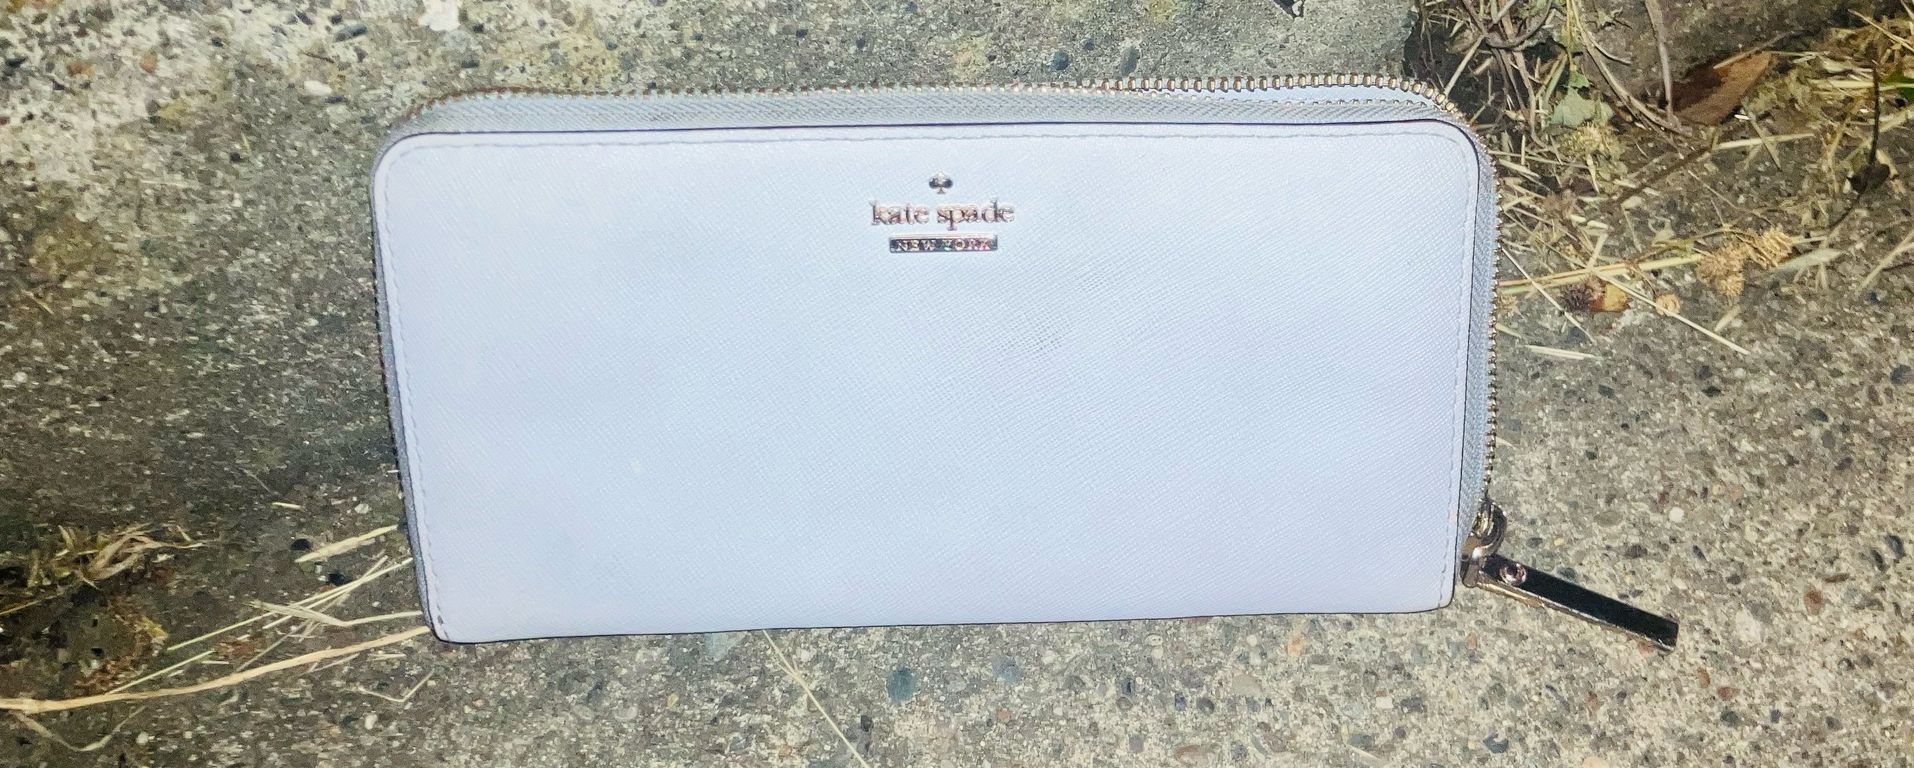 Authentic KATE SPADE Wallet